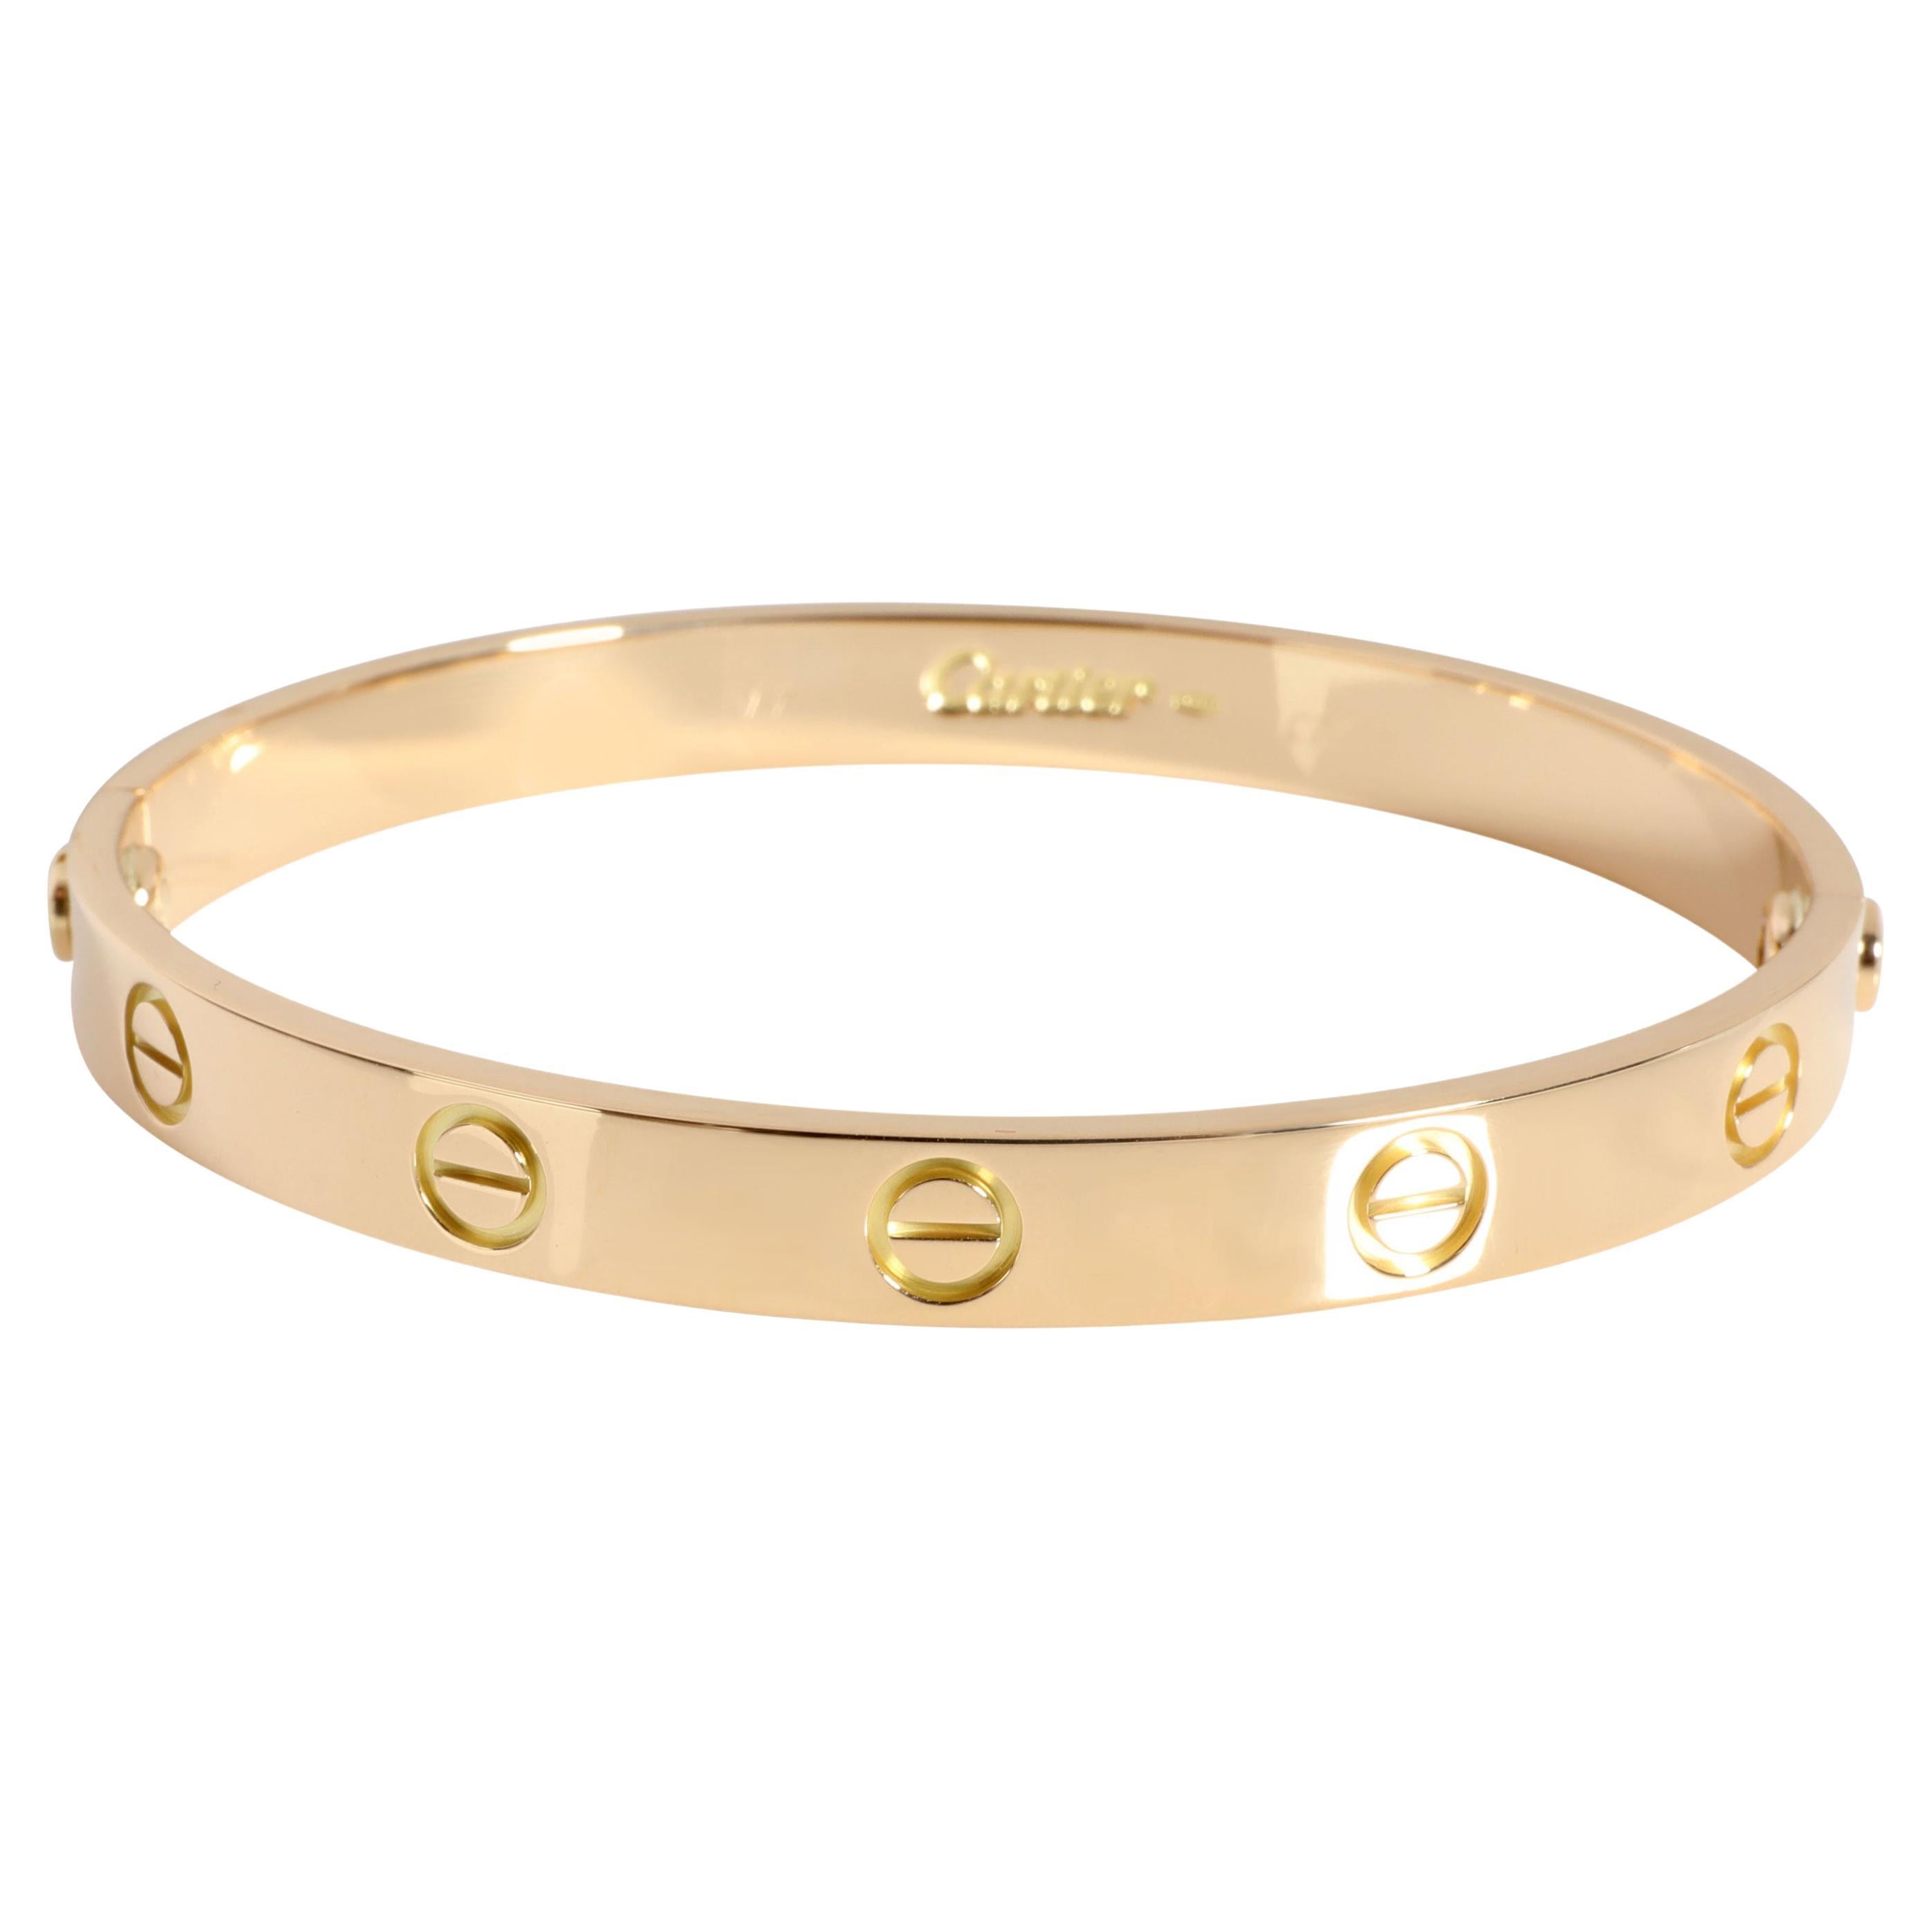 Cartier Love Bracelet in 18K Yellow Gold at 1stDibs